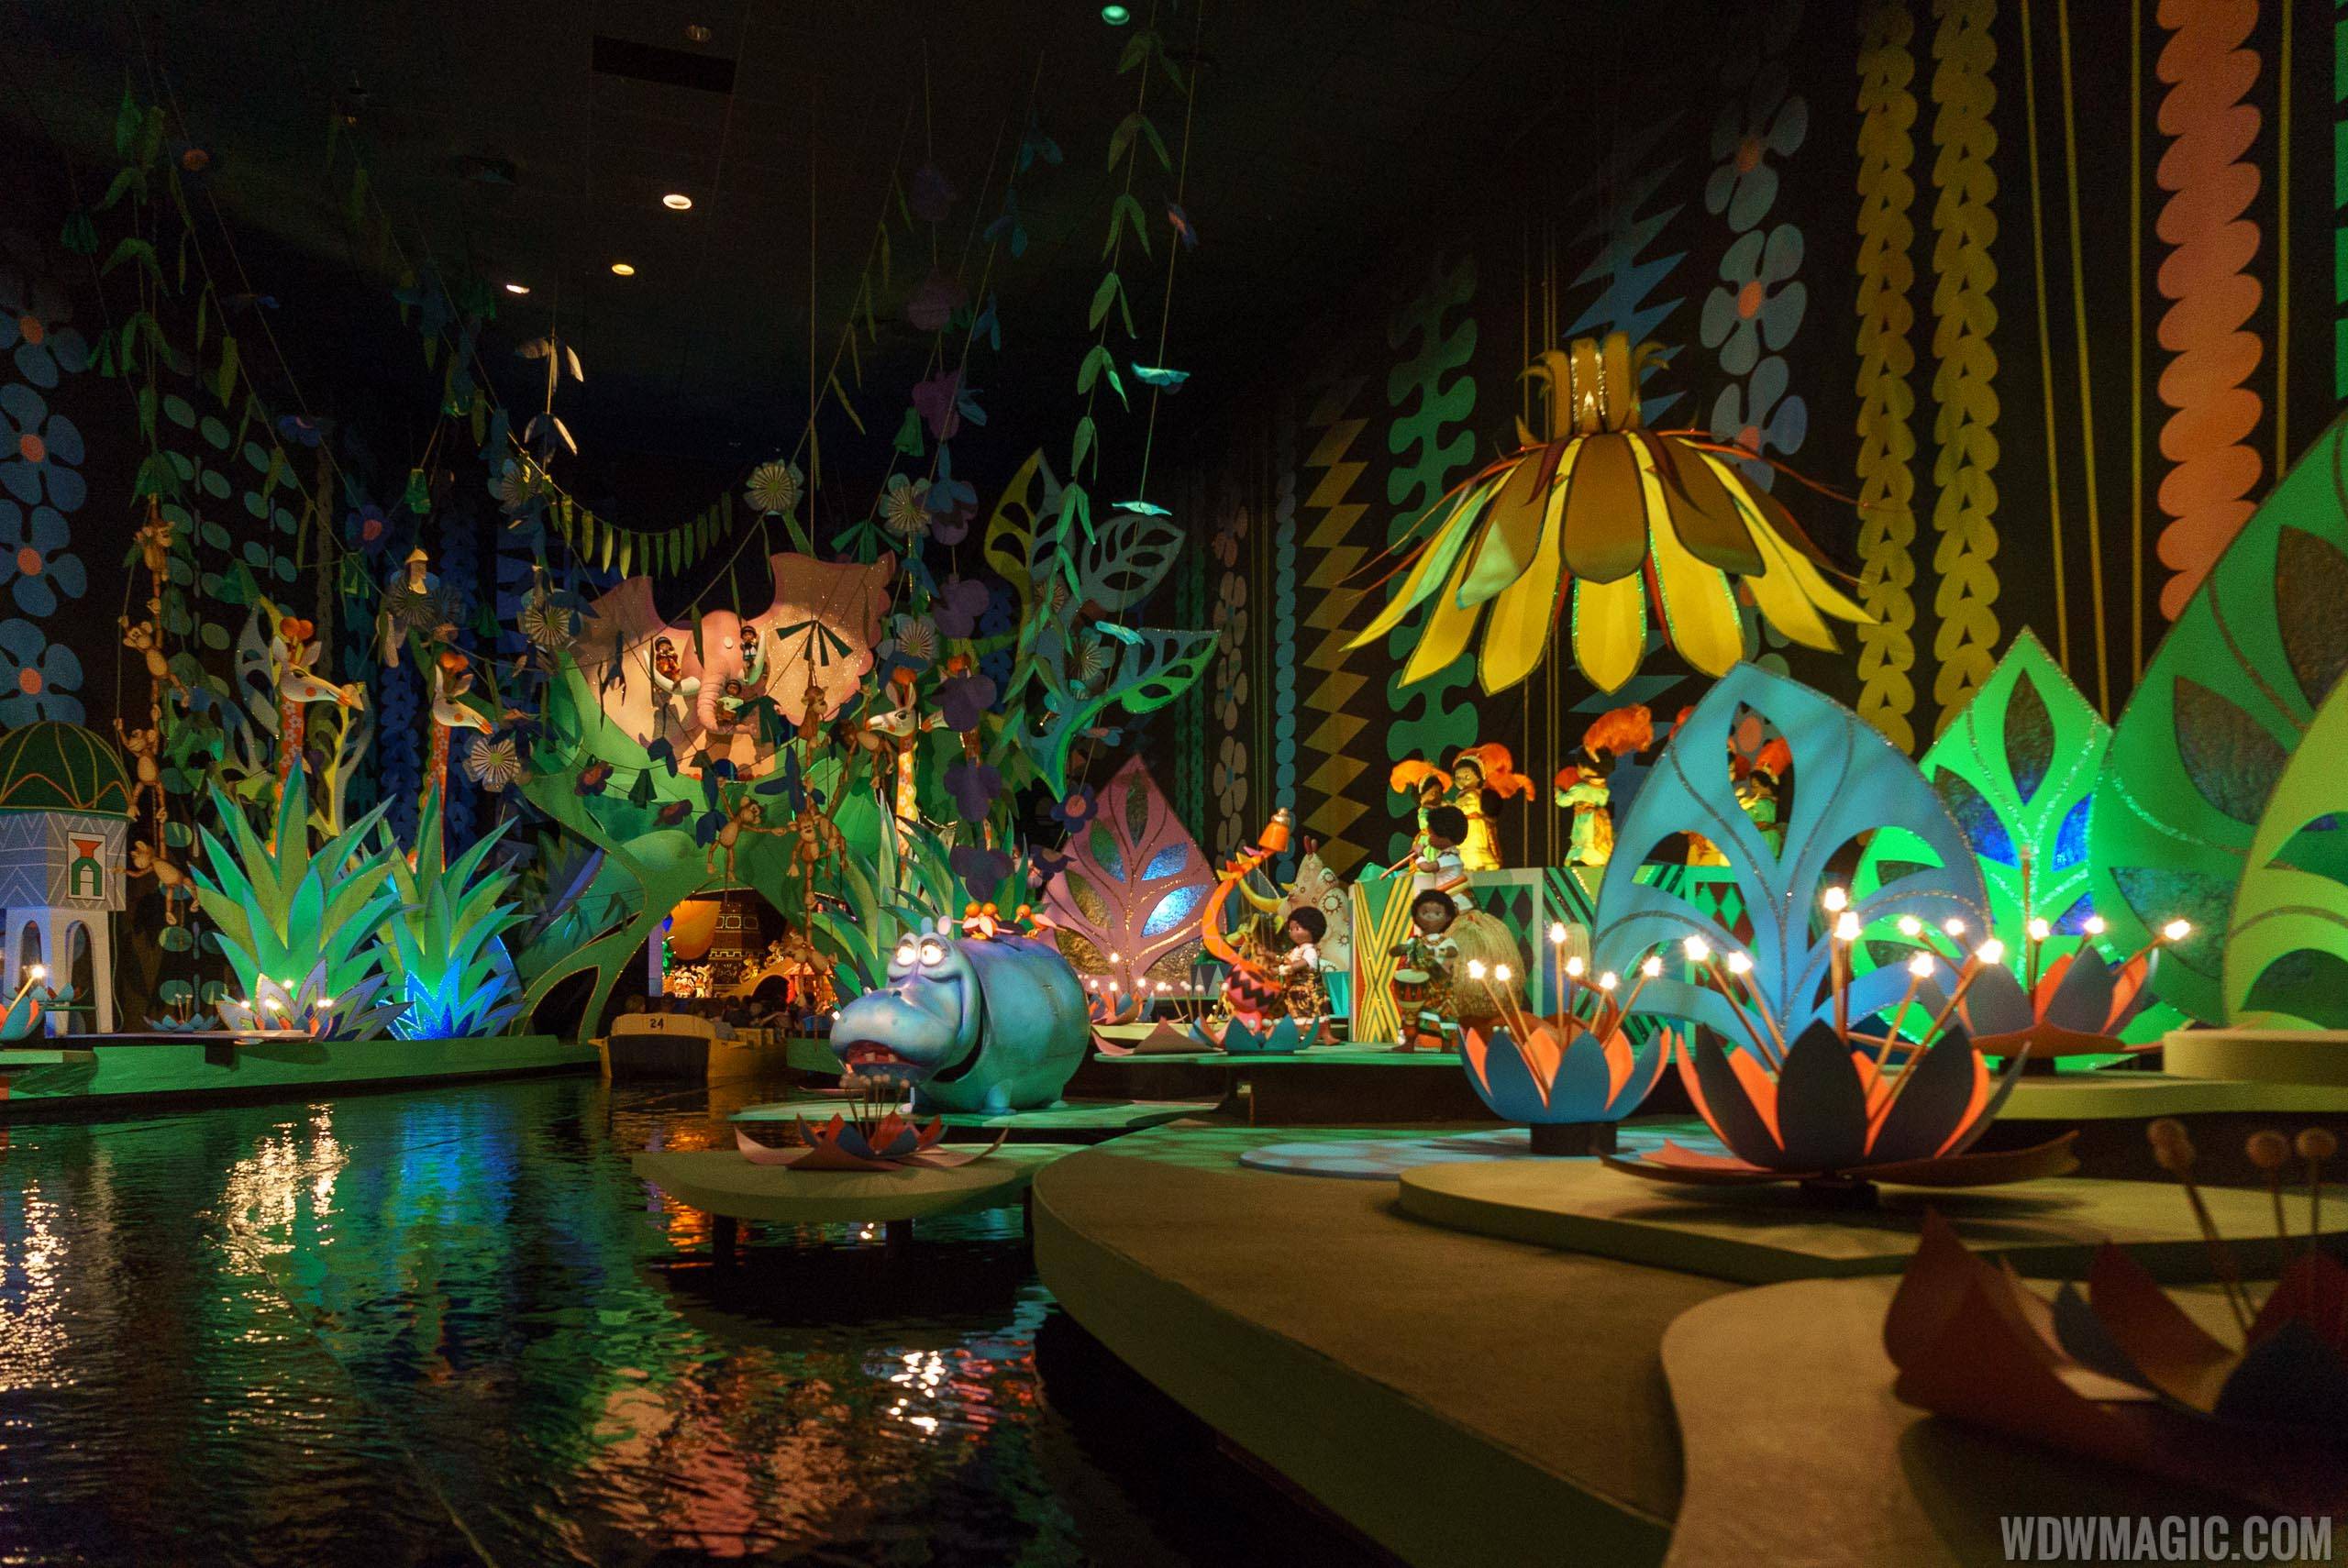 it's a small world closing for short refurbishment in December